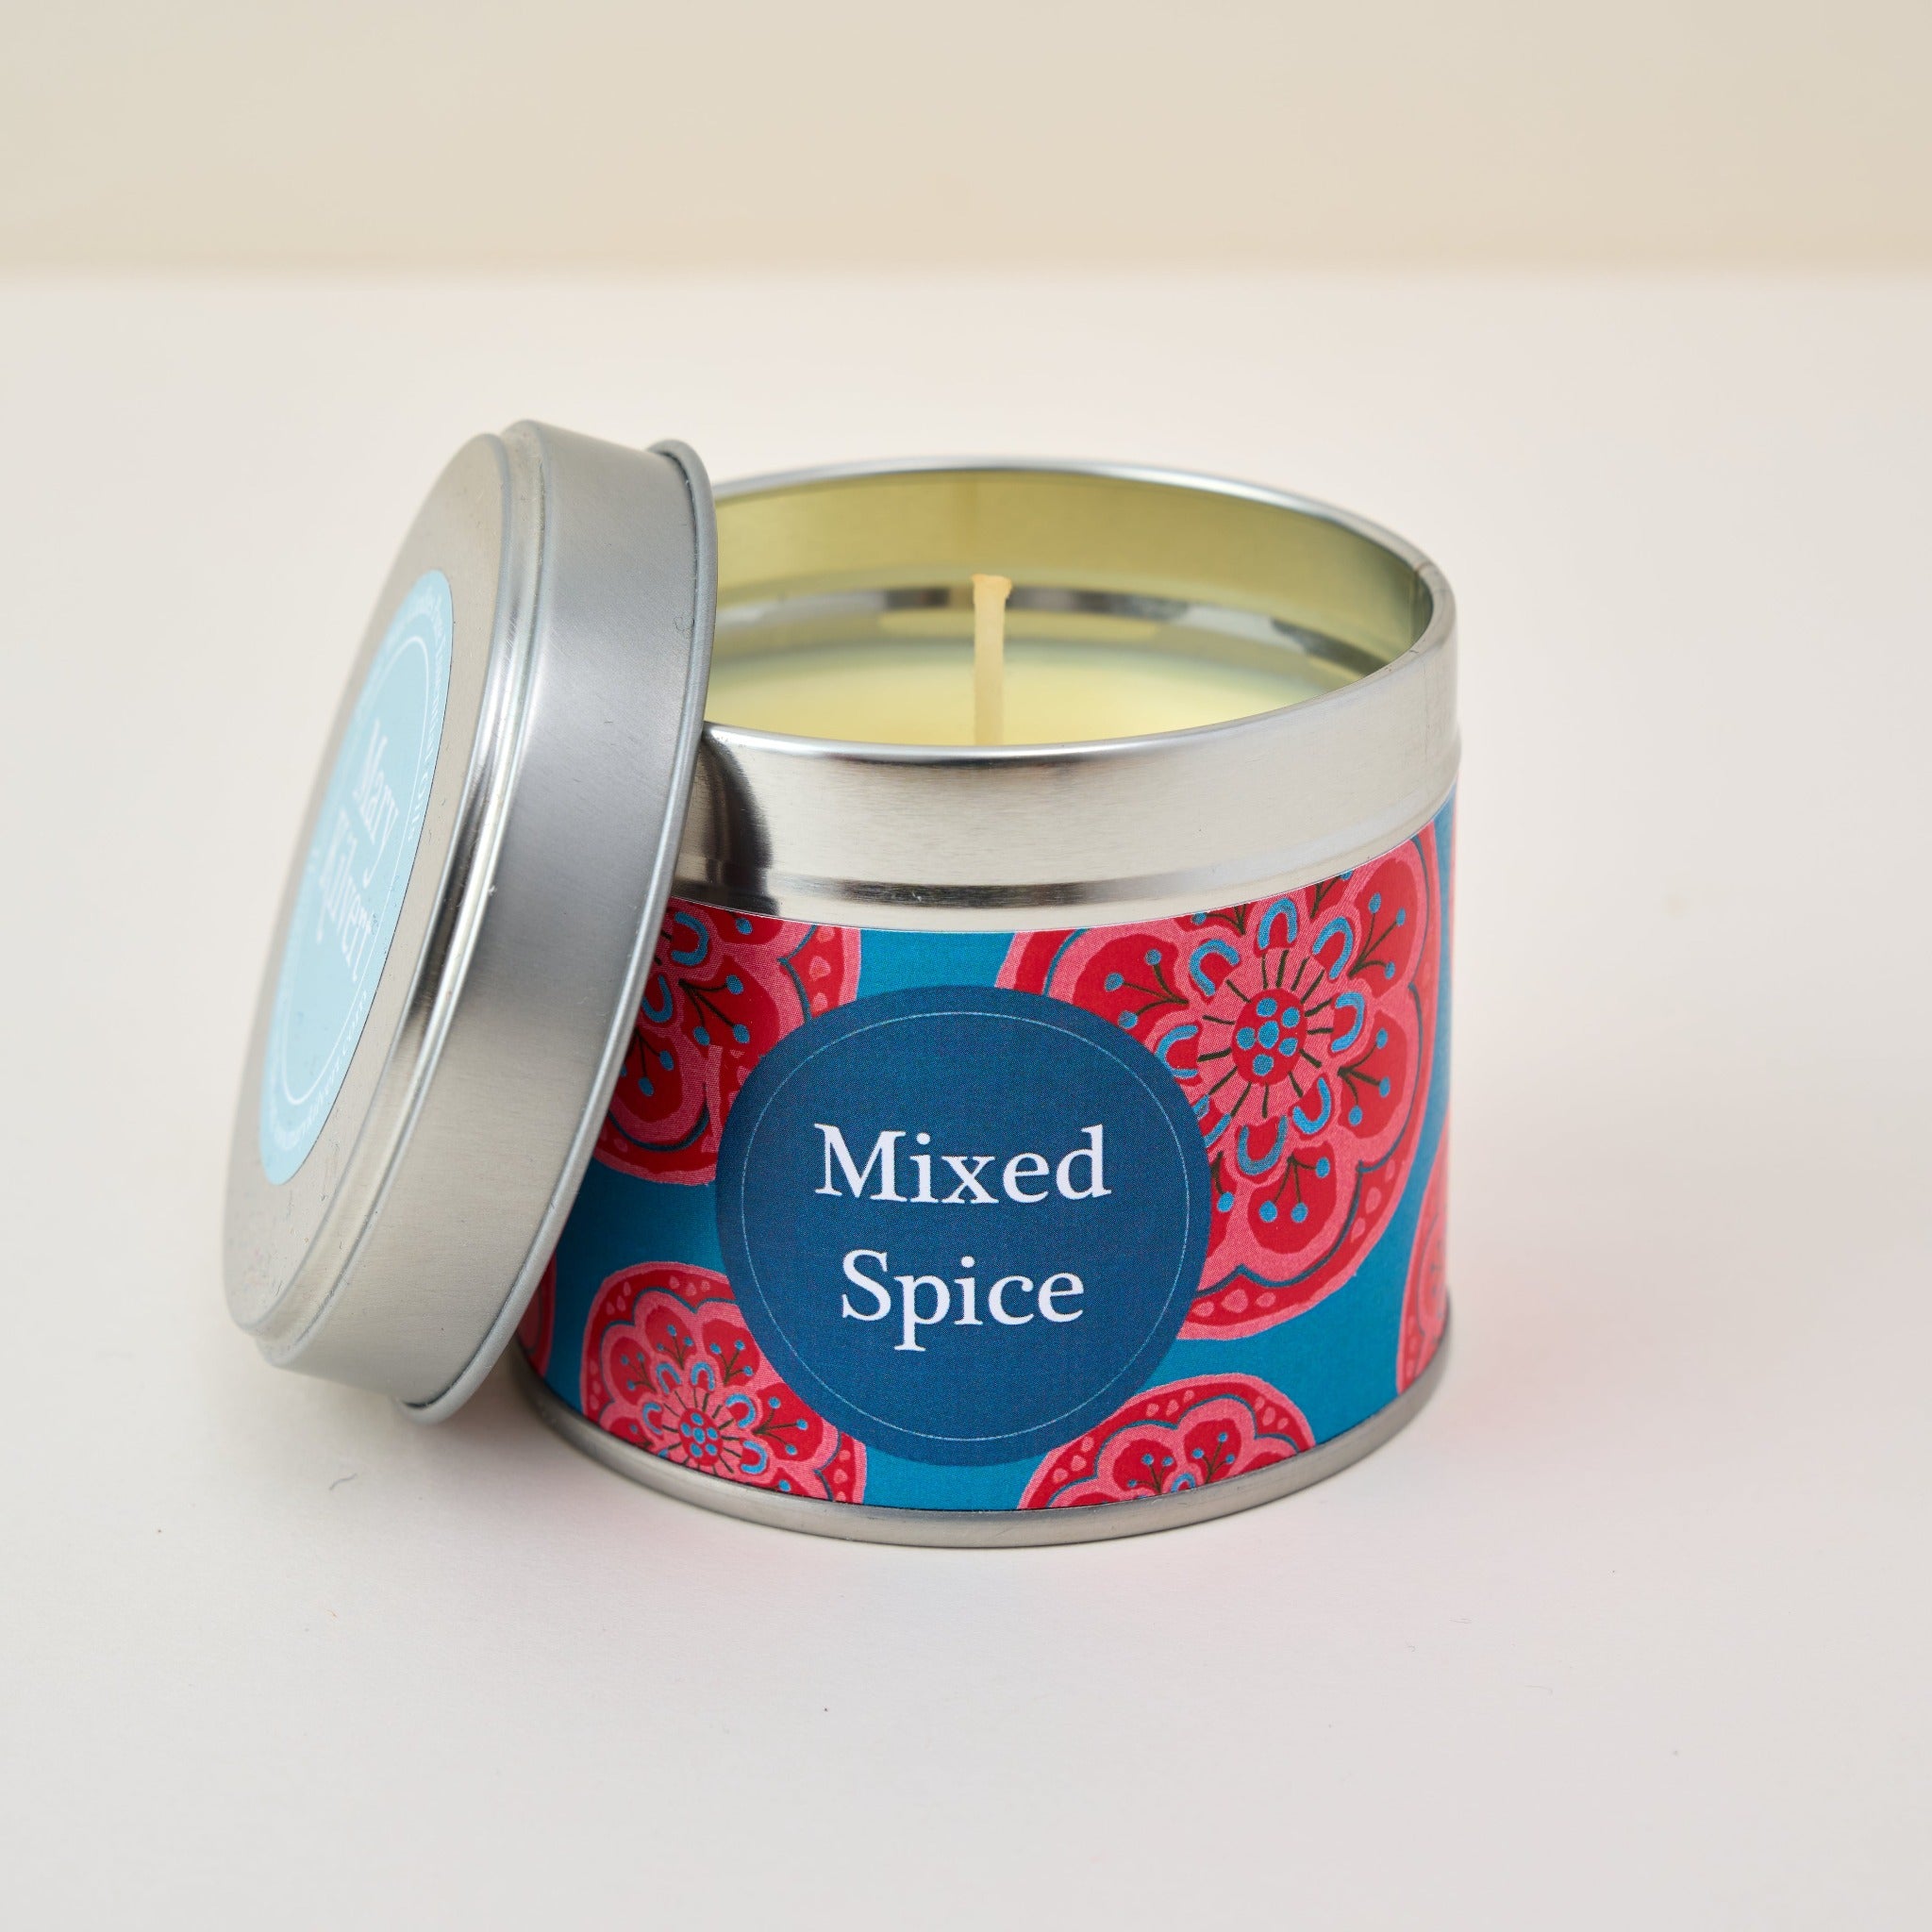 Mixed Spice Candle by Mary Kilvert